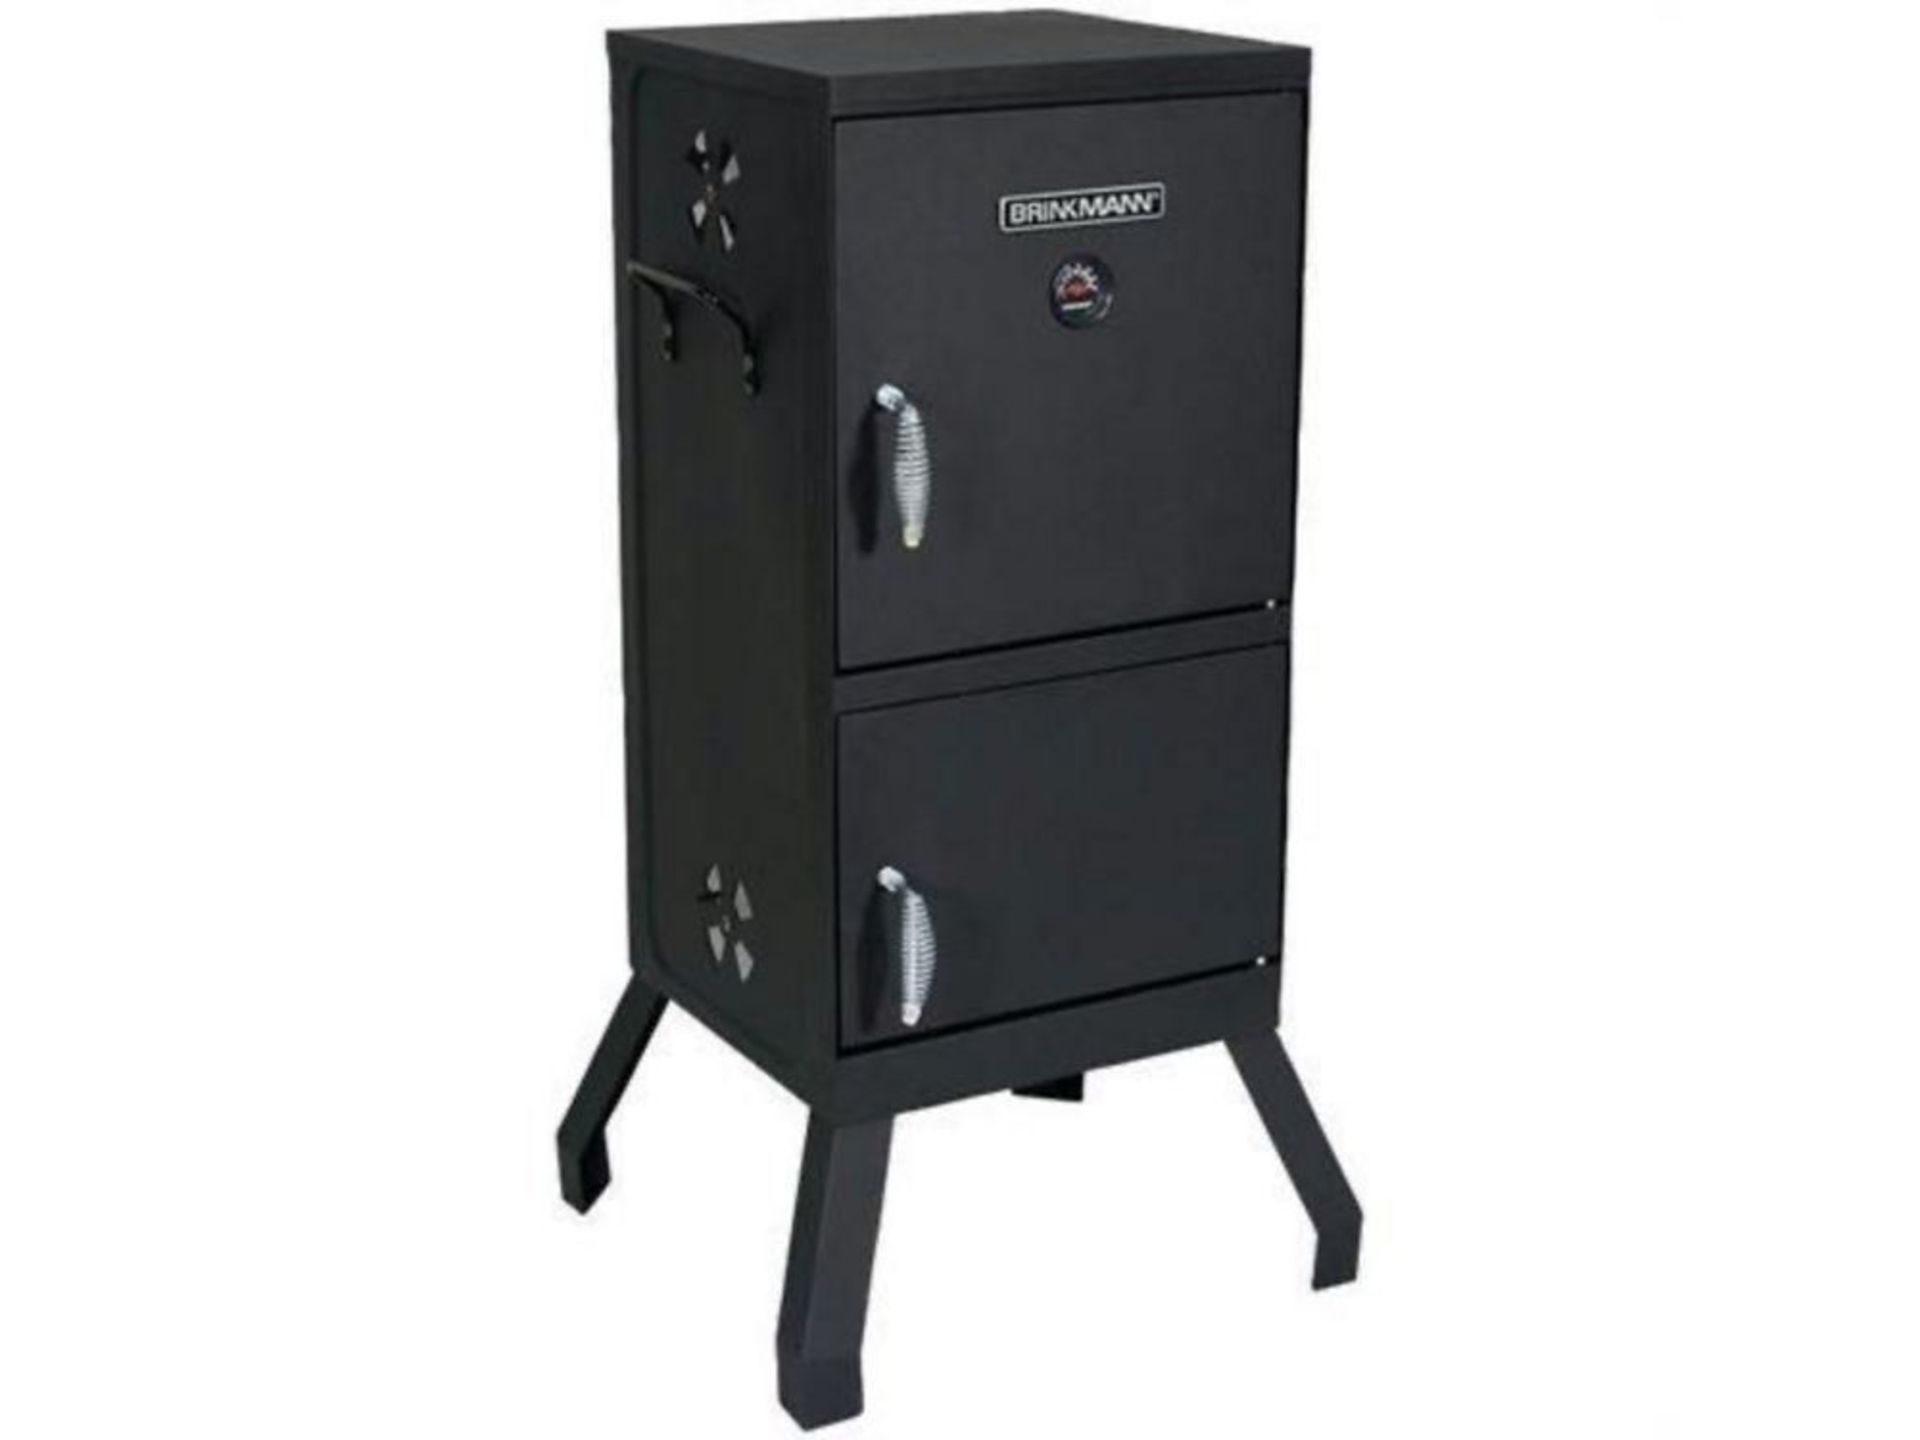 Brinkmann 810-5502-W Square 2-Door Vertical Charcoal Smoker, New in Box